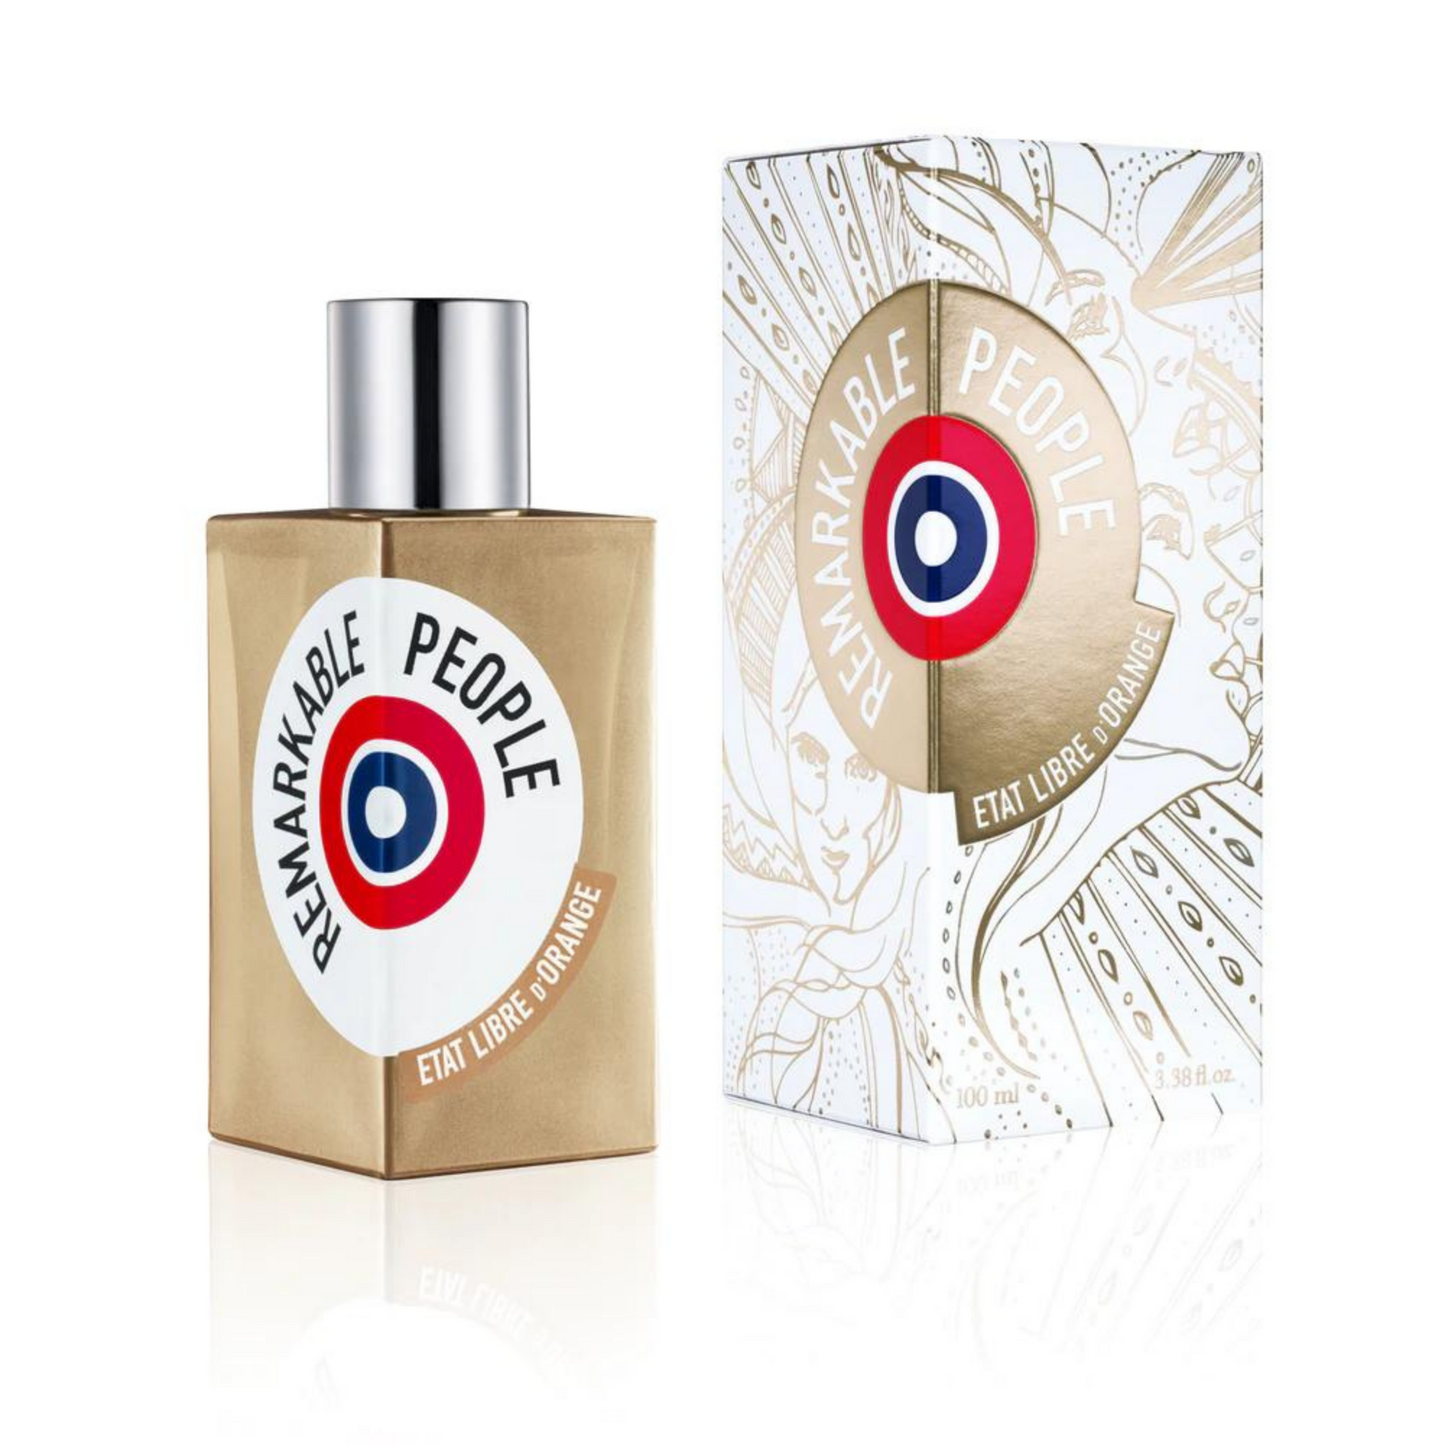 Primary Image of Remarkable People EDP 50 ml